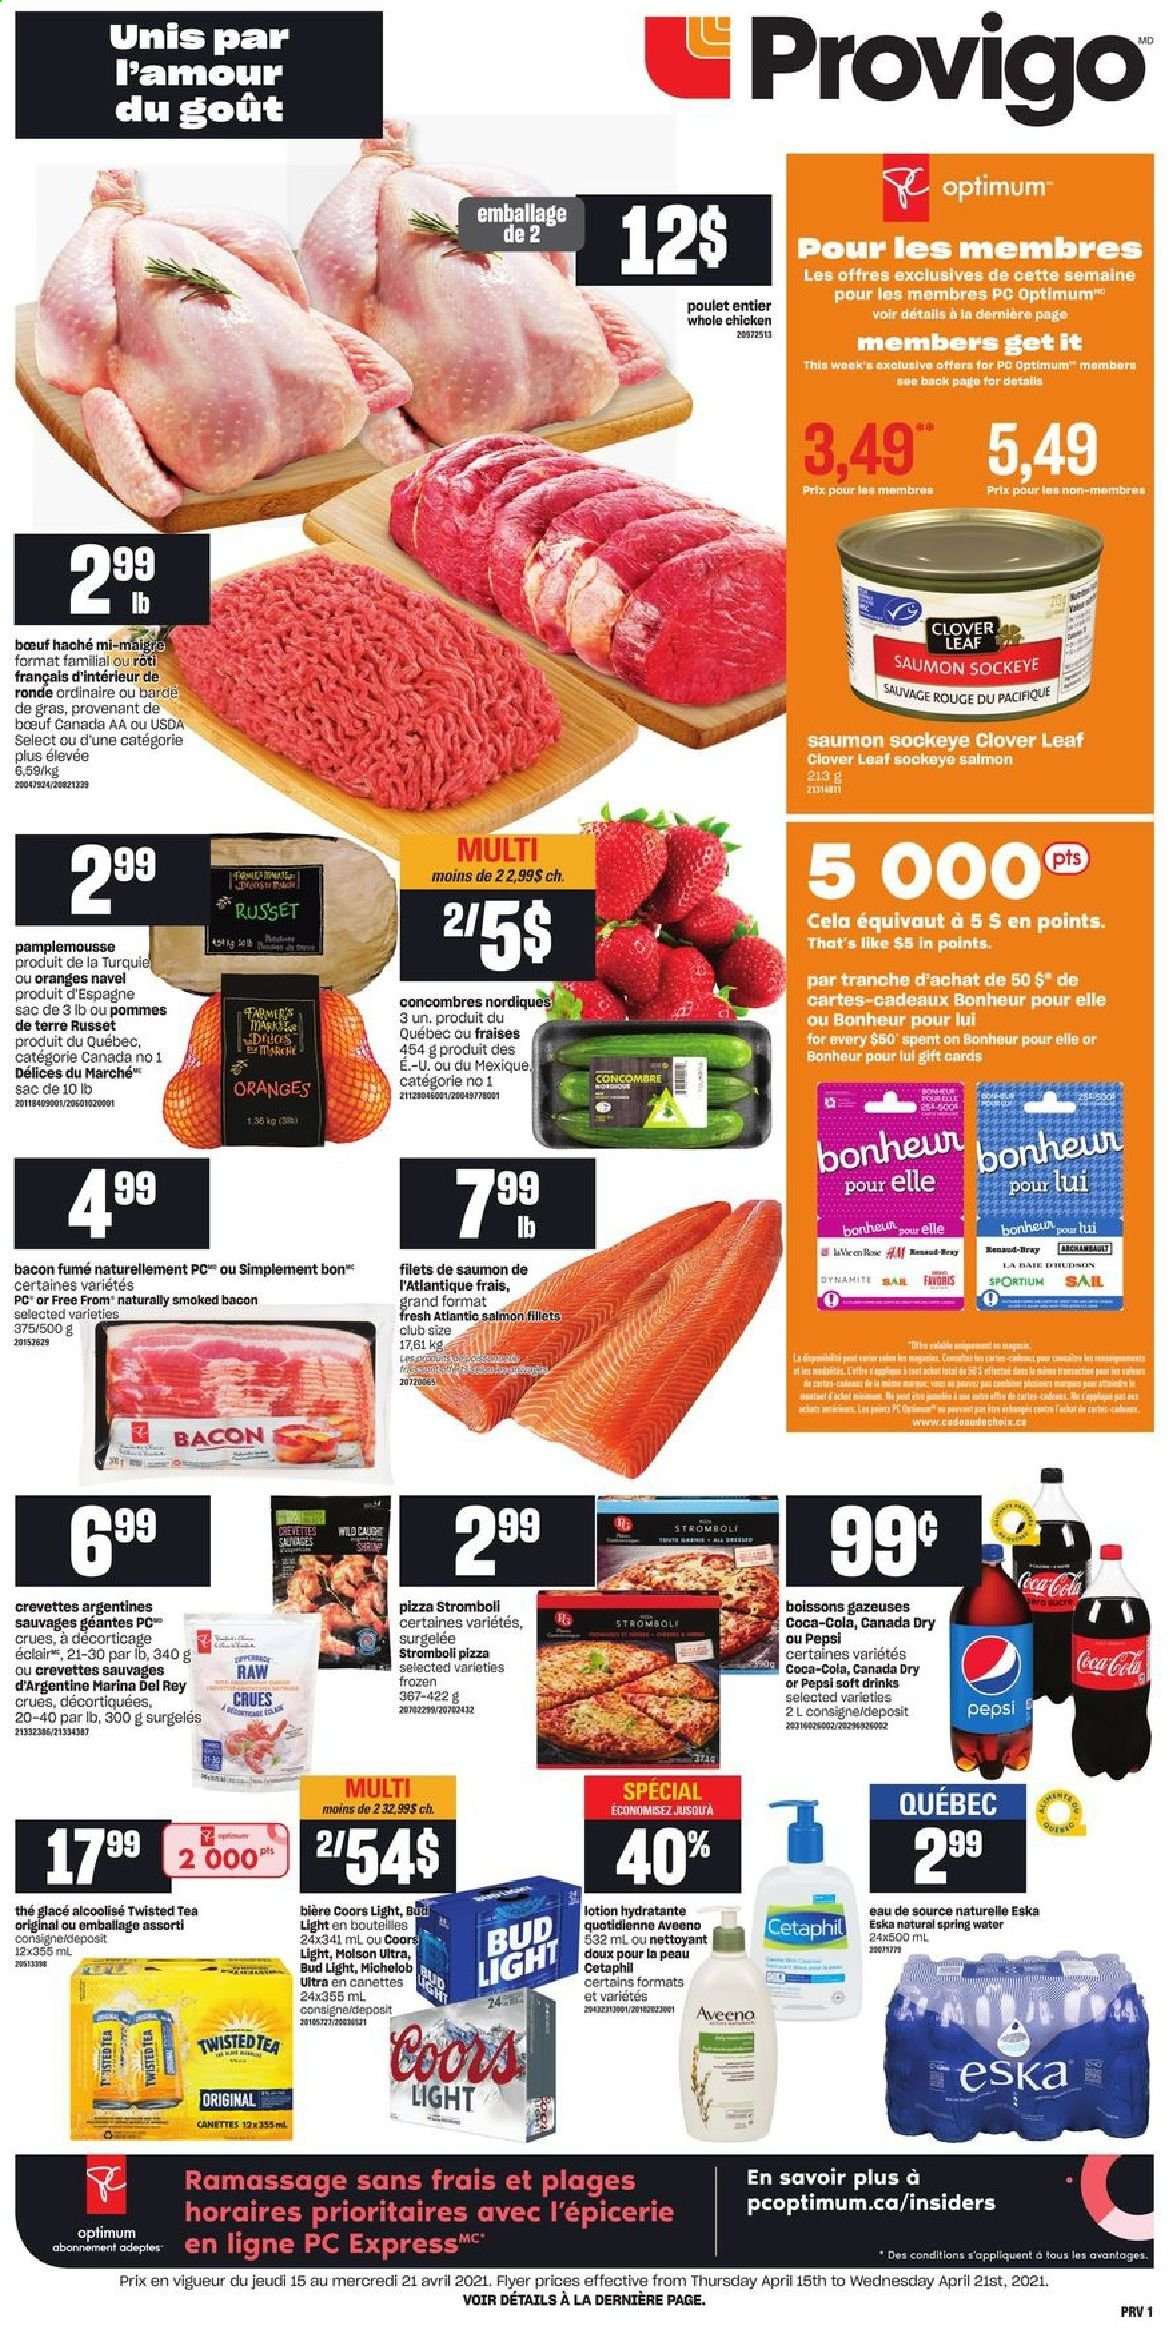 thumbnail - Provigo Flyer - April 15, 2021 - April 21, 2021 - Sales products - russet potatoes, salmon, salmon fillet, pizza, bacon, Clover, Canada Dry, Coca-Cola, Pepsi, soft drink, spring water, tea, beer, Bud Light, whole chicken, chicken, Aveeno, body lotion, Coors, Twisted Tea, Michelob. Page 1.